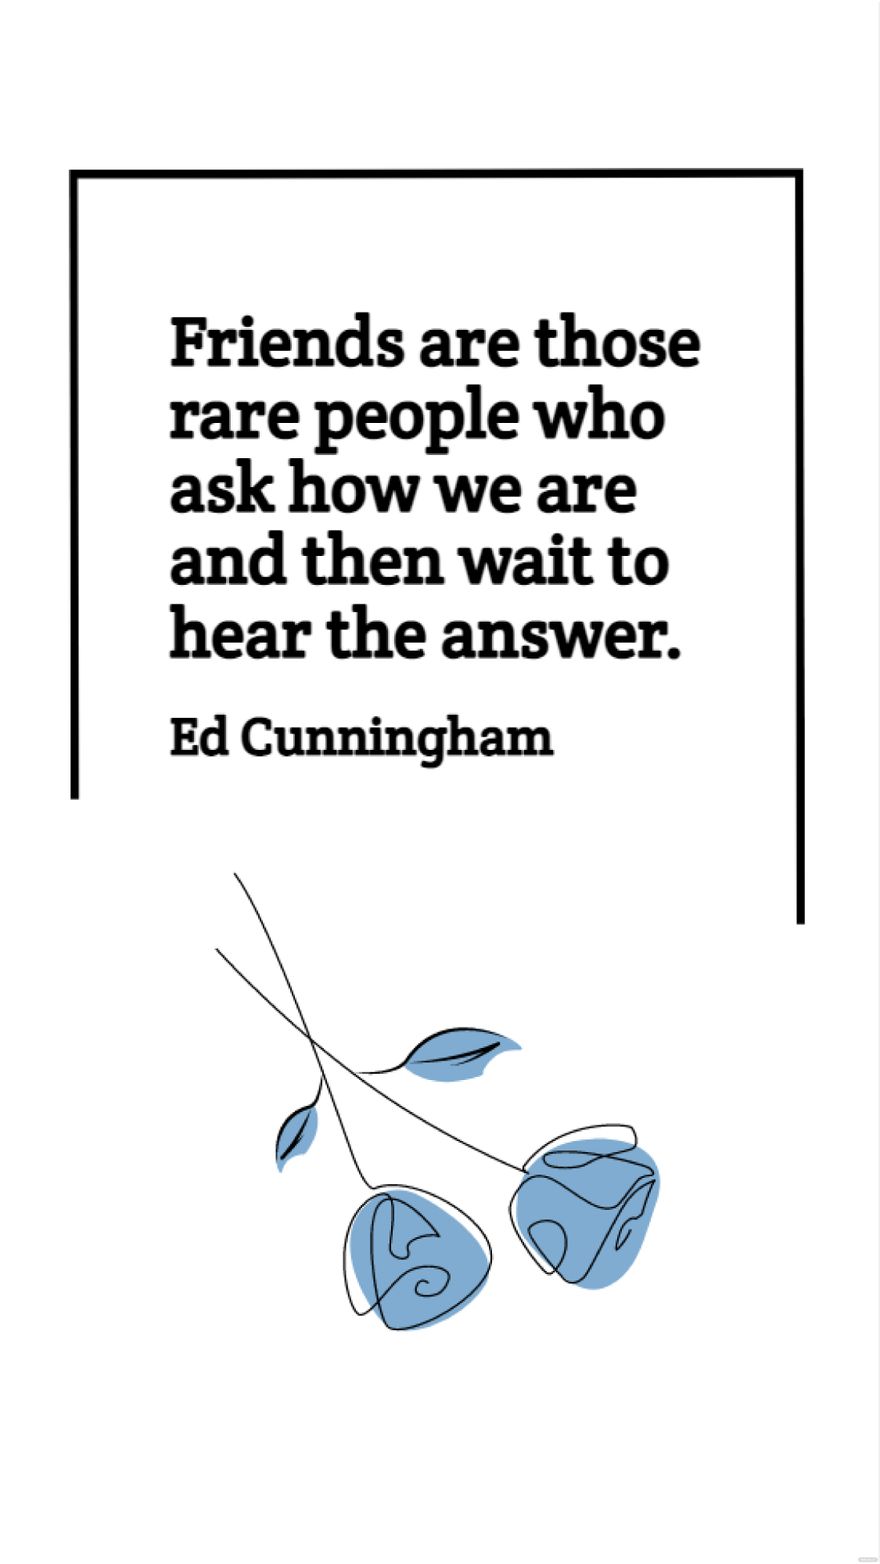 Free Ed Cunningham - Friends are those rare people who ask how we are and then wait to hear the answer. in JPG